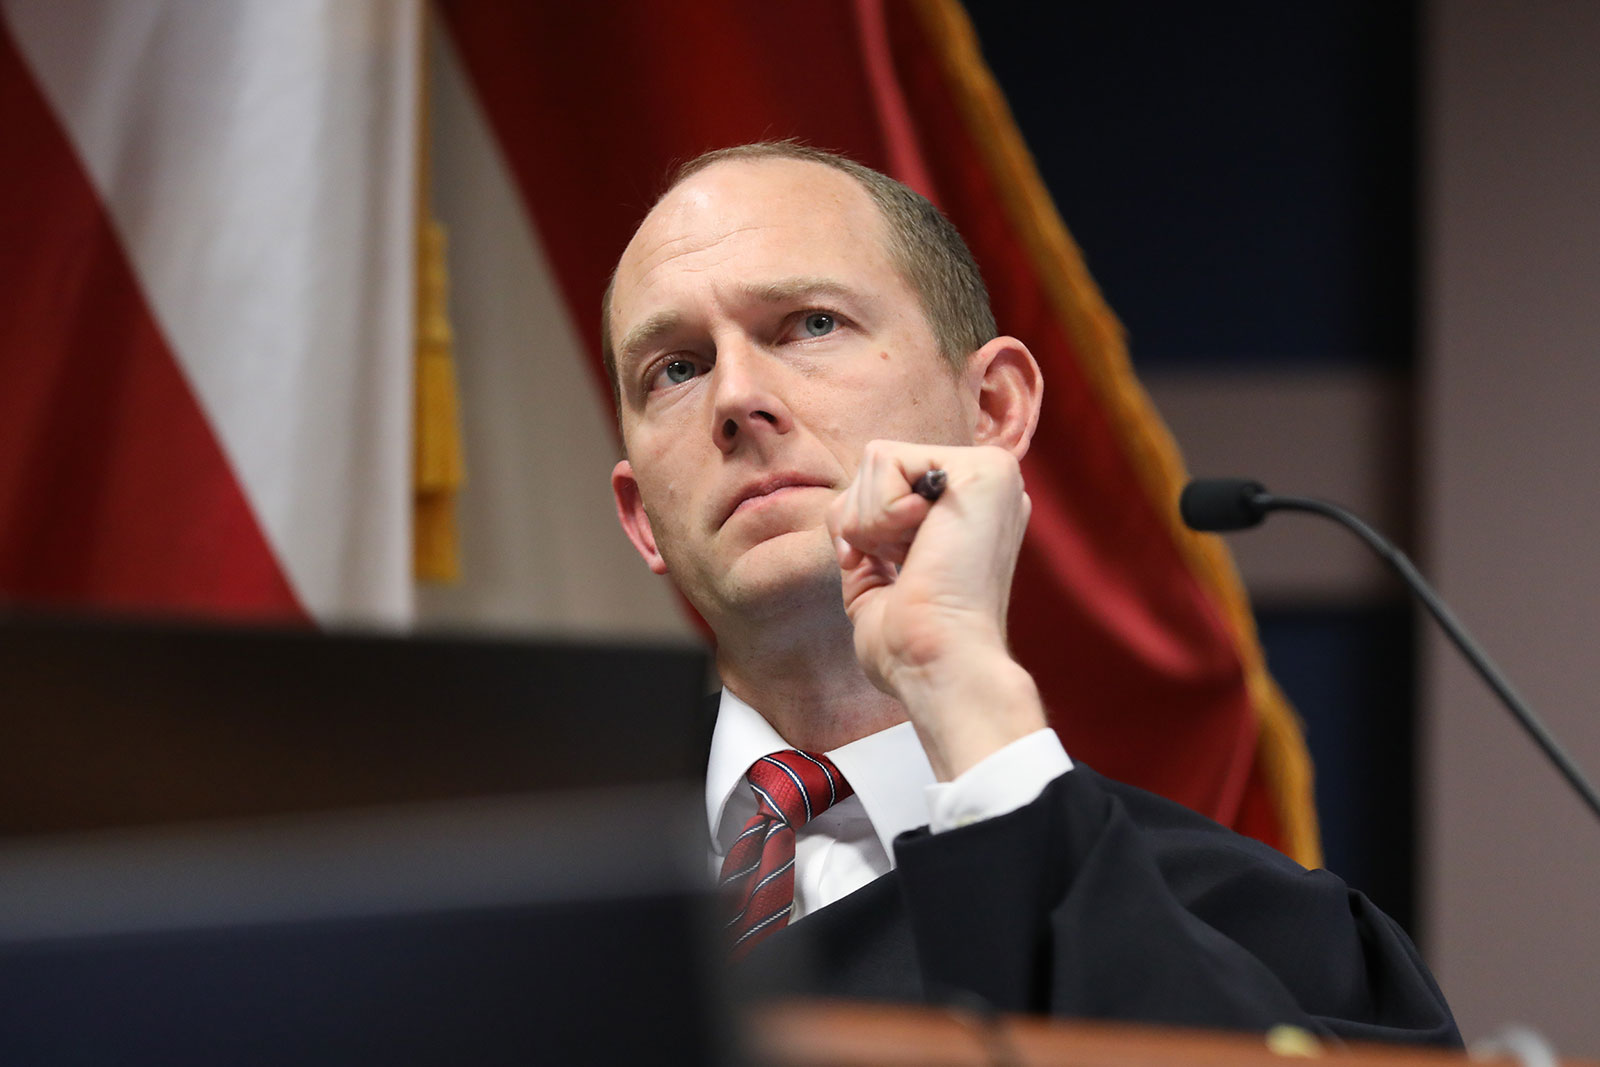 Fulton County Superior Judge Scott McAfee looks on during a hearing at the Fulton County Courthouse on Thursday, February 15, in Atlanta, Georgia. 